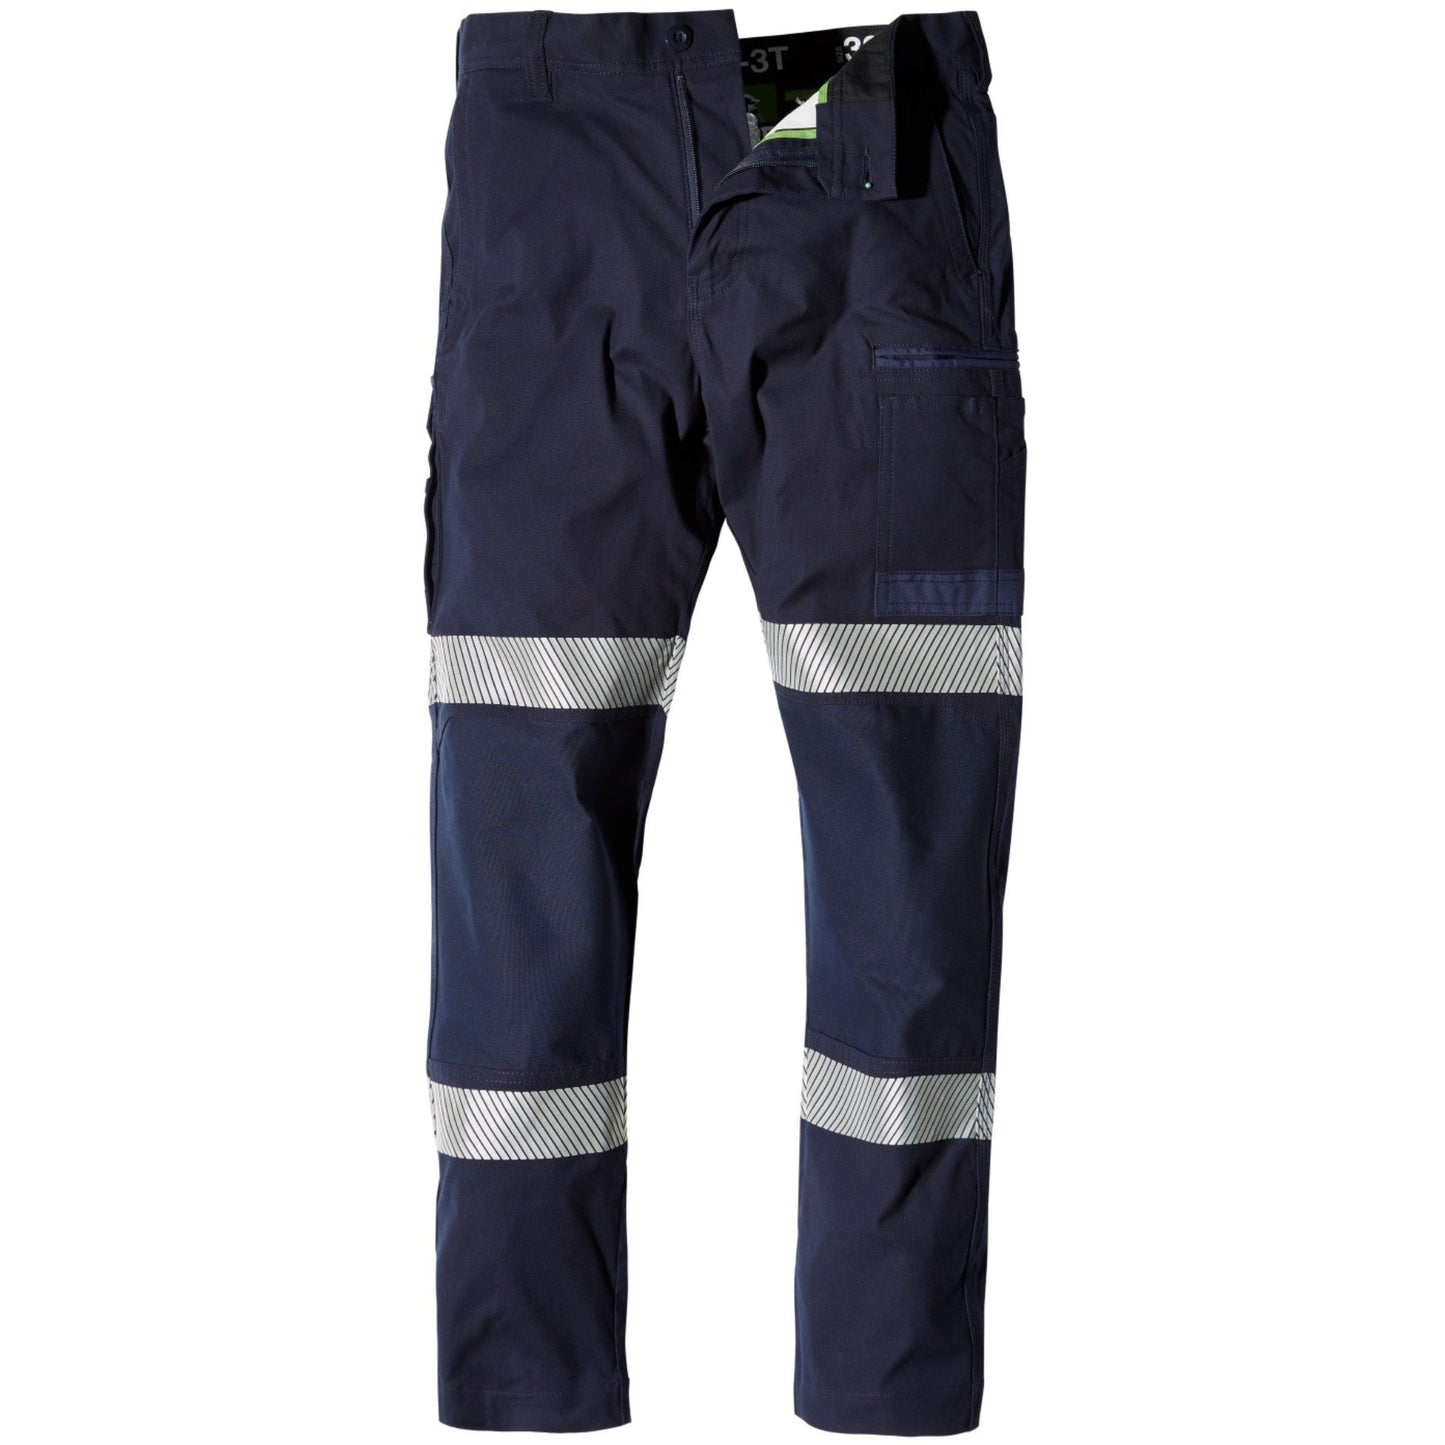 FXD Taped Stretch Work Cargo Pants